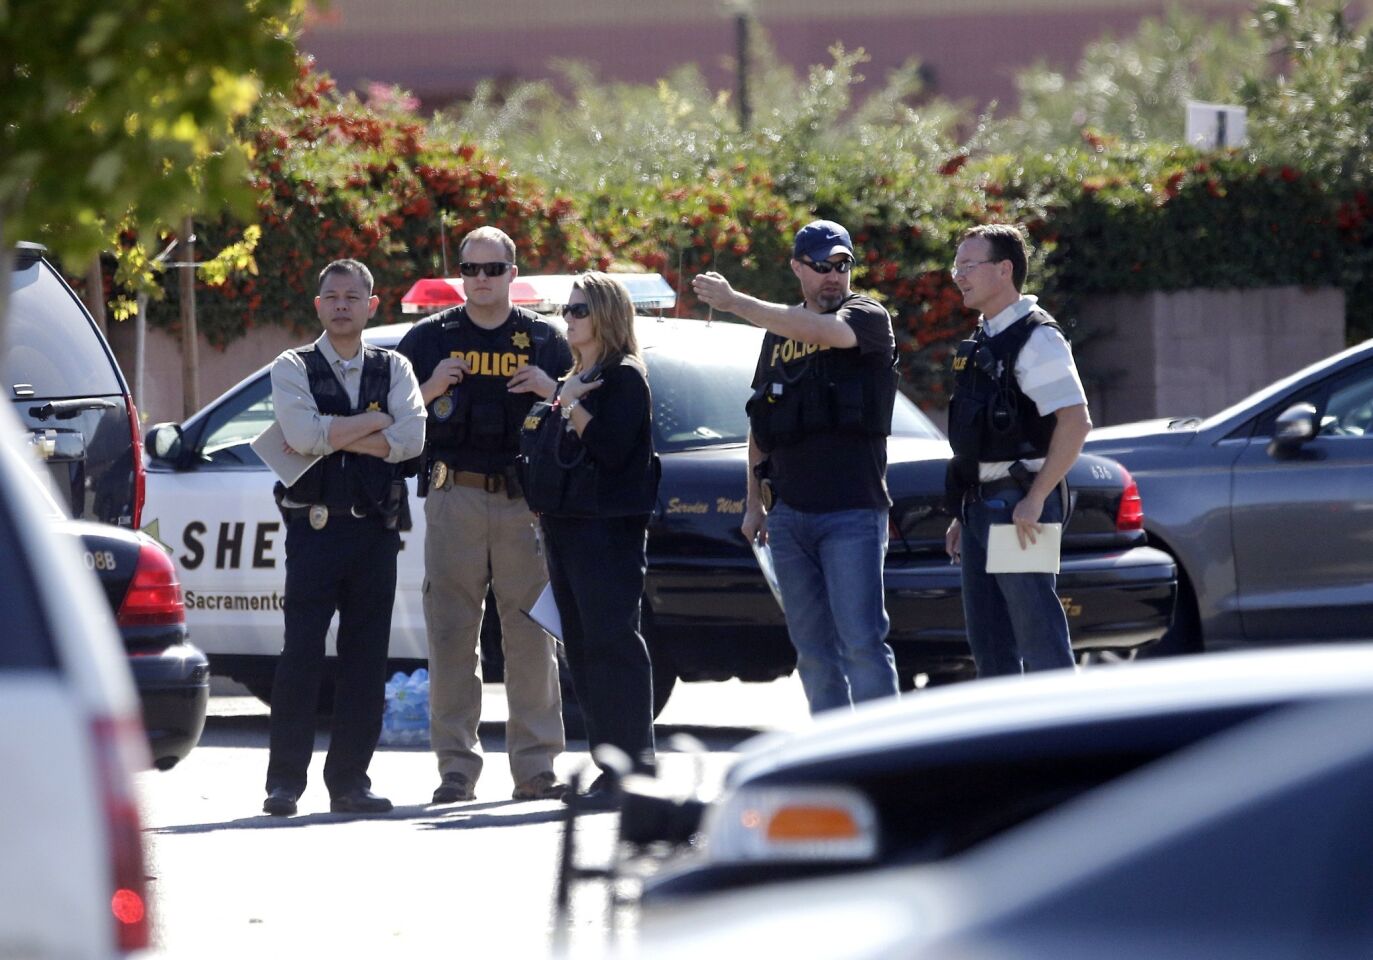 Law enforcement officers gather at the site where a Sacramento County sheriff's deputy was fatally shot by an assailant who then allegedly carjacked two vehicles and prompted a manhunt that ended with two other deputies wounded, one mortally, along with a motorist.